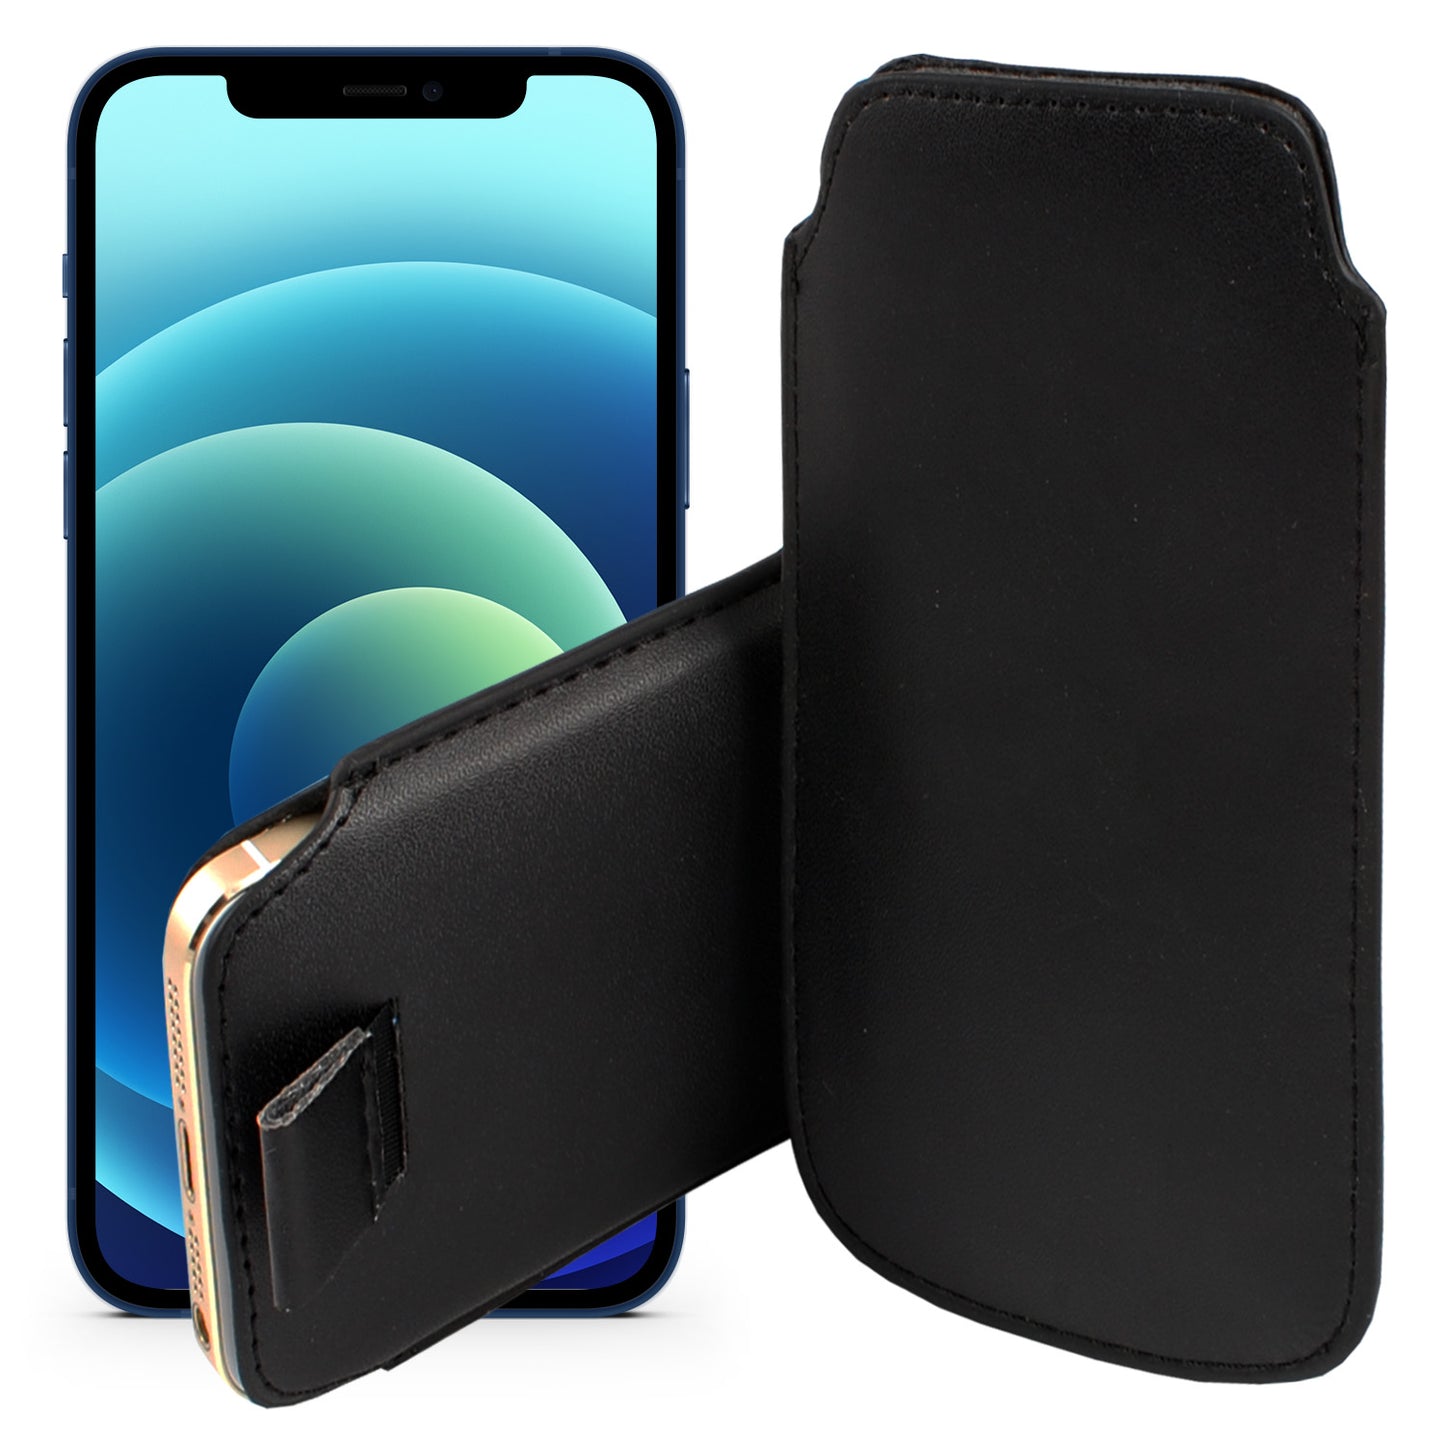 MEZON Pull Tab Slim Pouch for iPhone 13 Pro Max (6.7") PU Leather Sleeve Case – Shock Absorption – Black